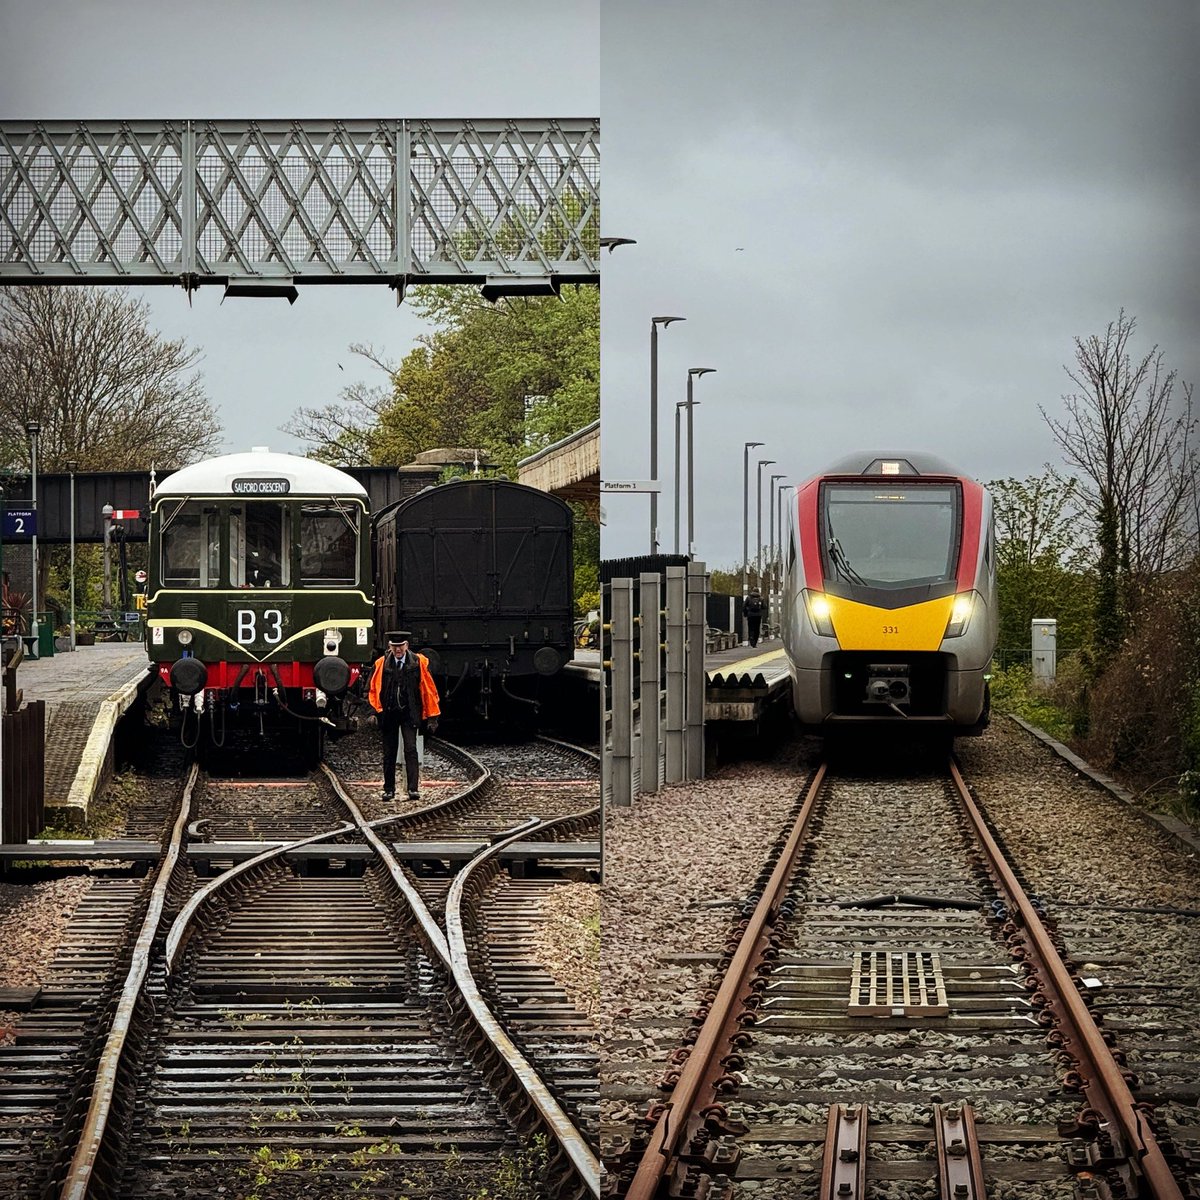 Old & New at Sheringham station this morning. #DriverLife